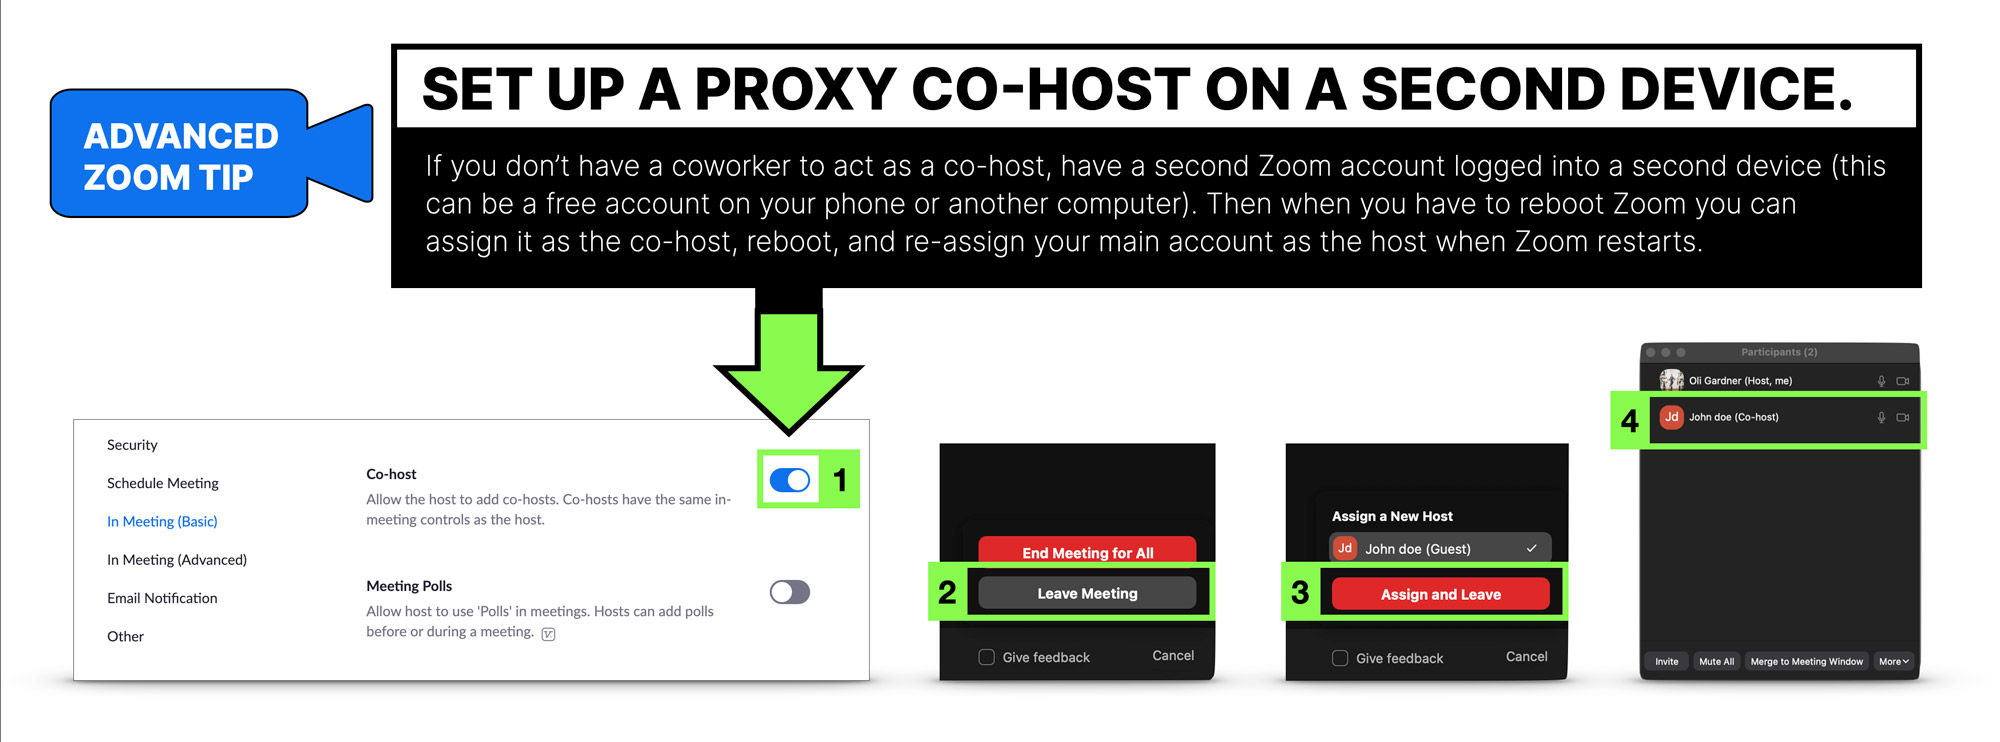 Use a proxy co-host so you can reboot Zoom in the middle of your virtual presentation